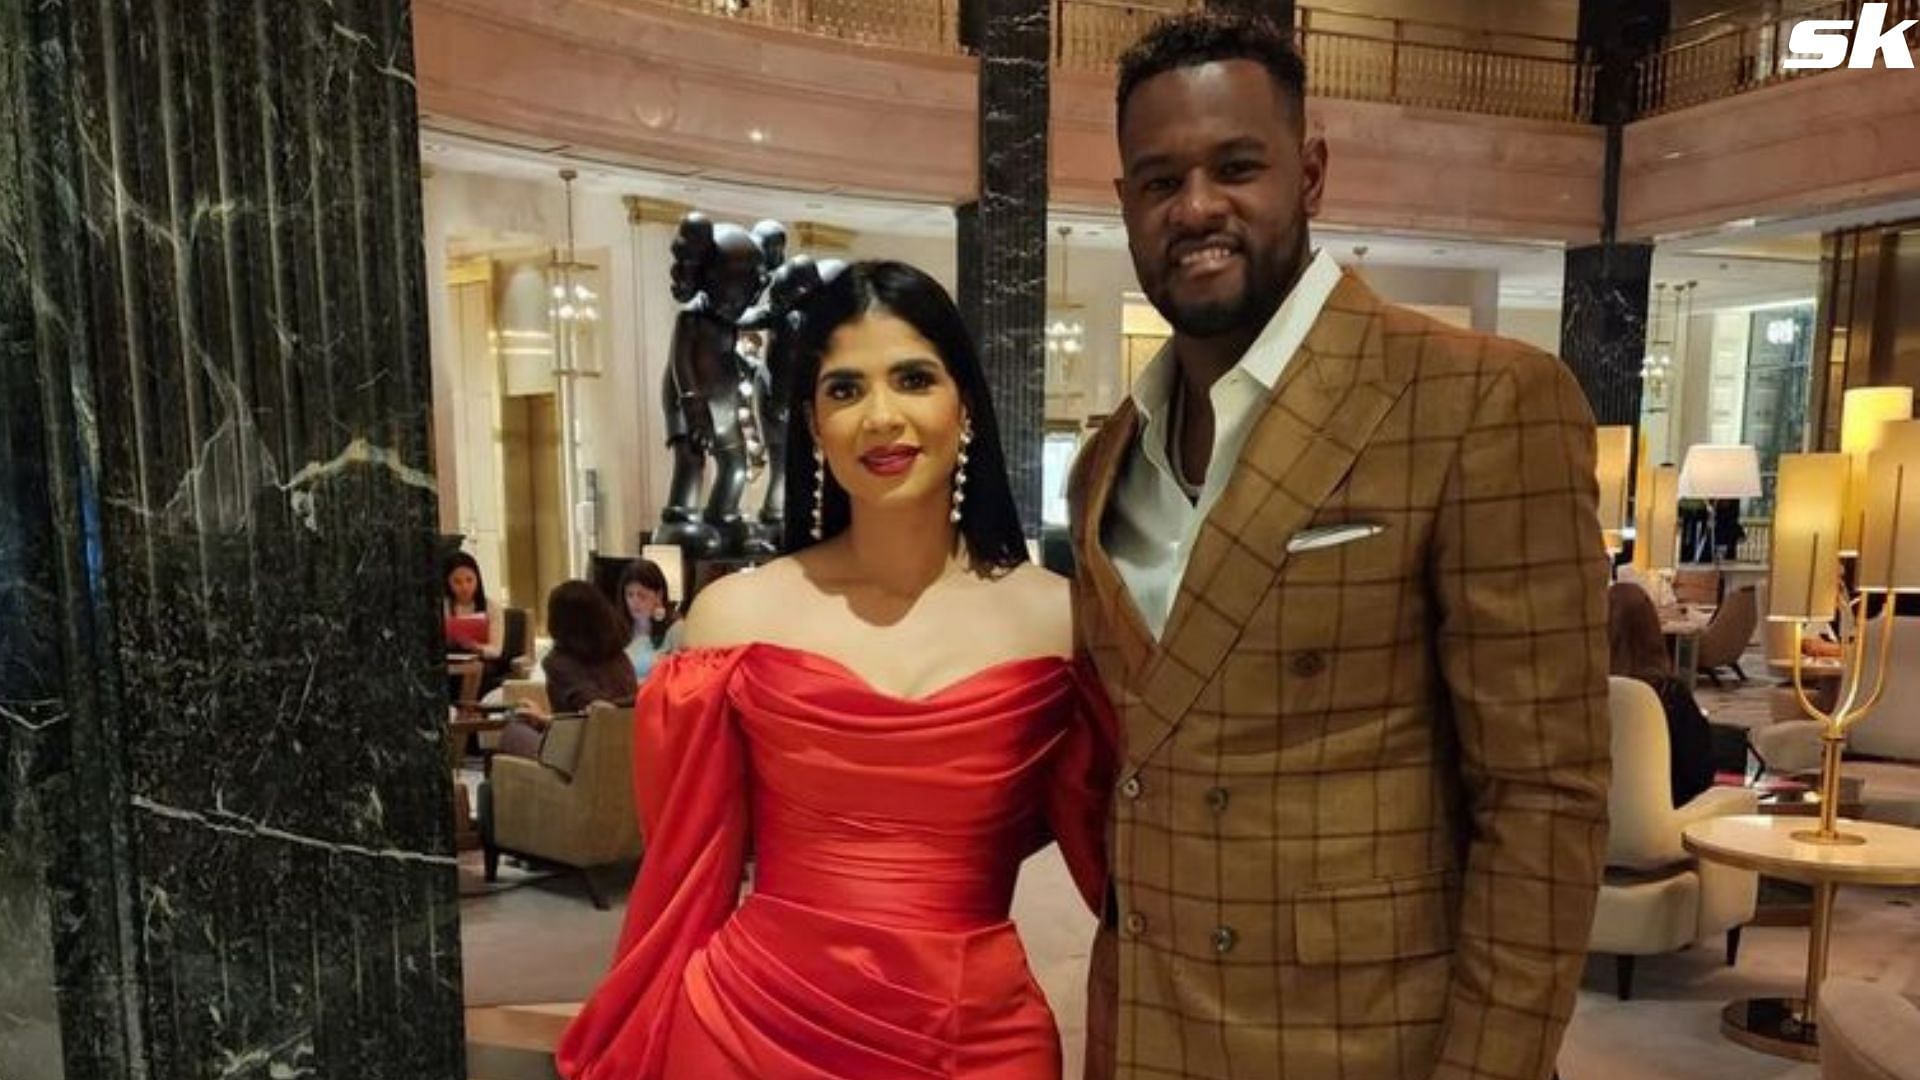 Who is Luis Severino's wife Rosmaly Severino? A closer look into the  personal life of injured Yankees pitcher